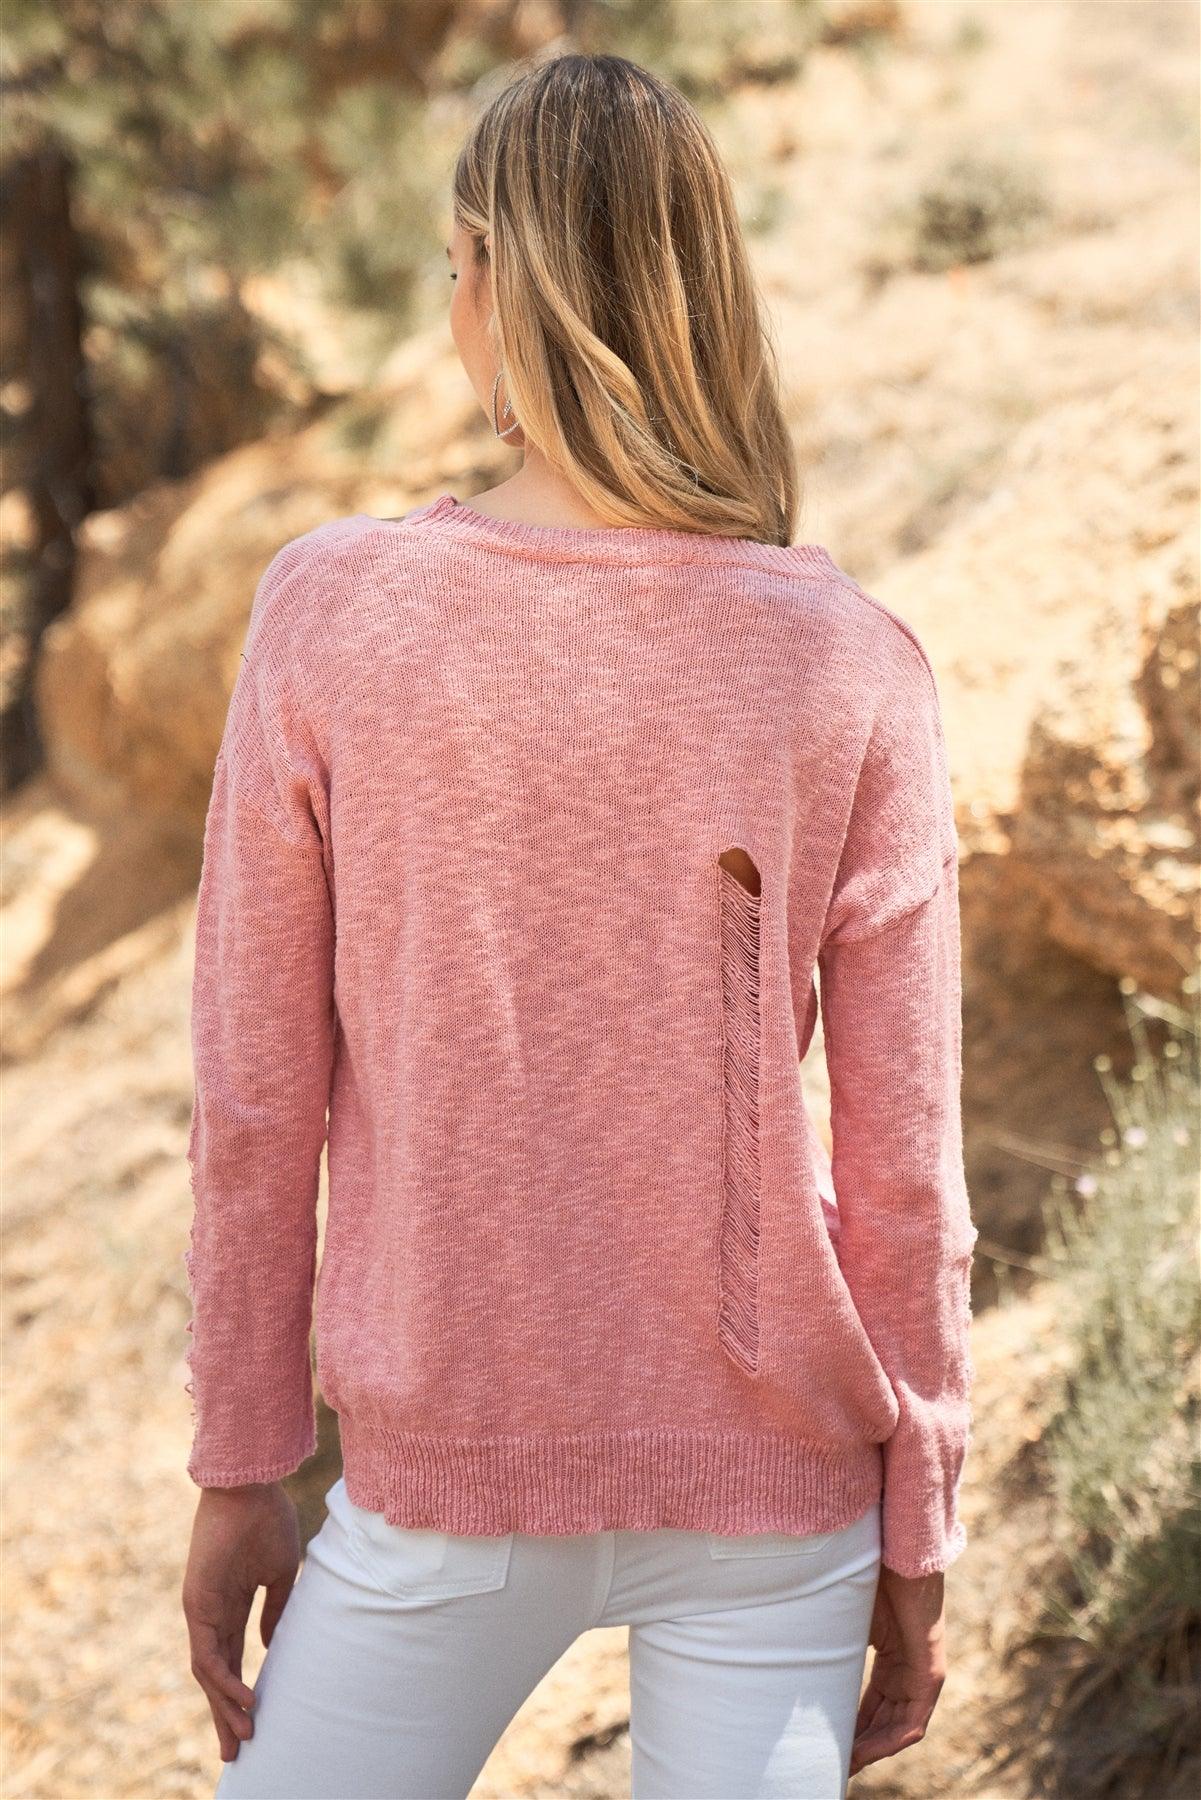 Rose Pink Knit Ruined Detail Long Sleeve Distressed Sweater Top